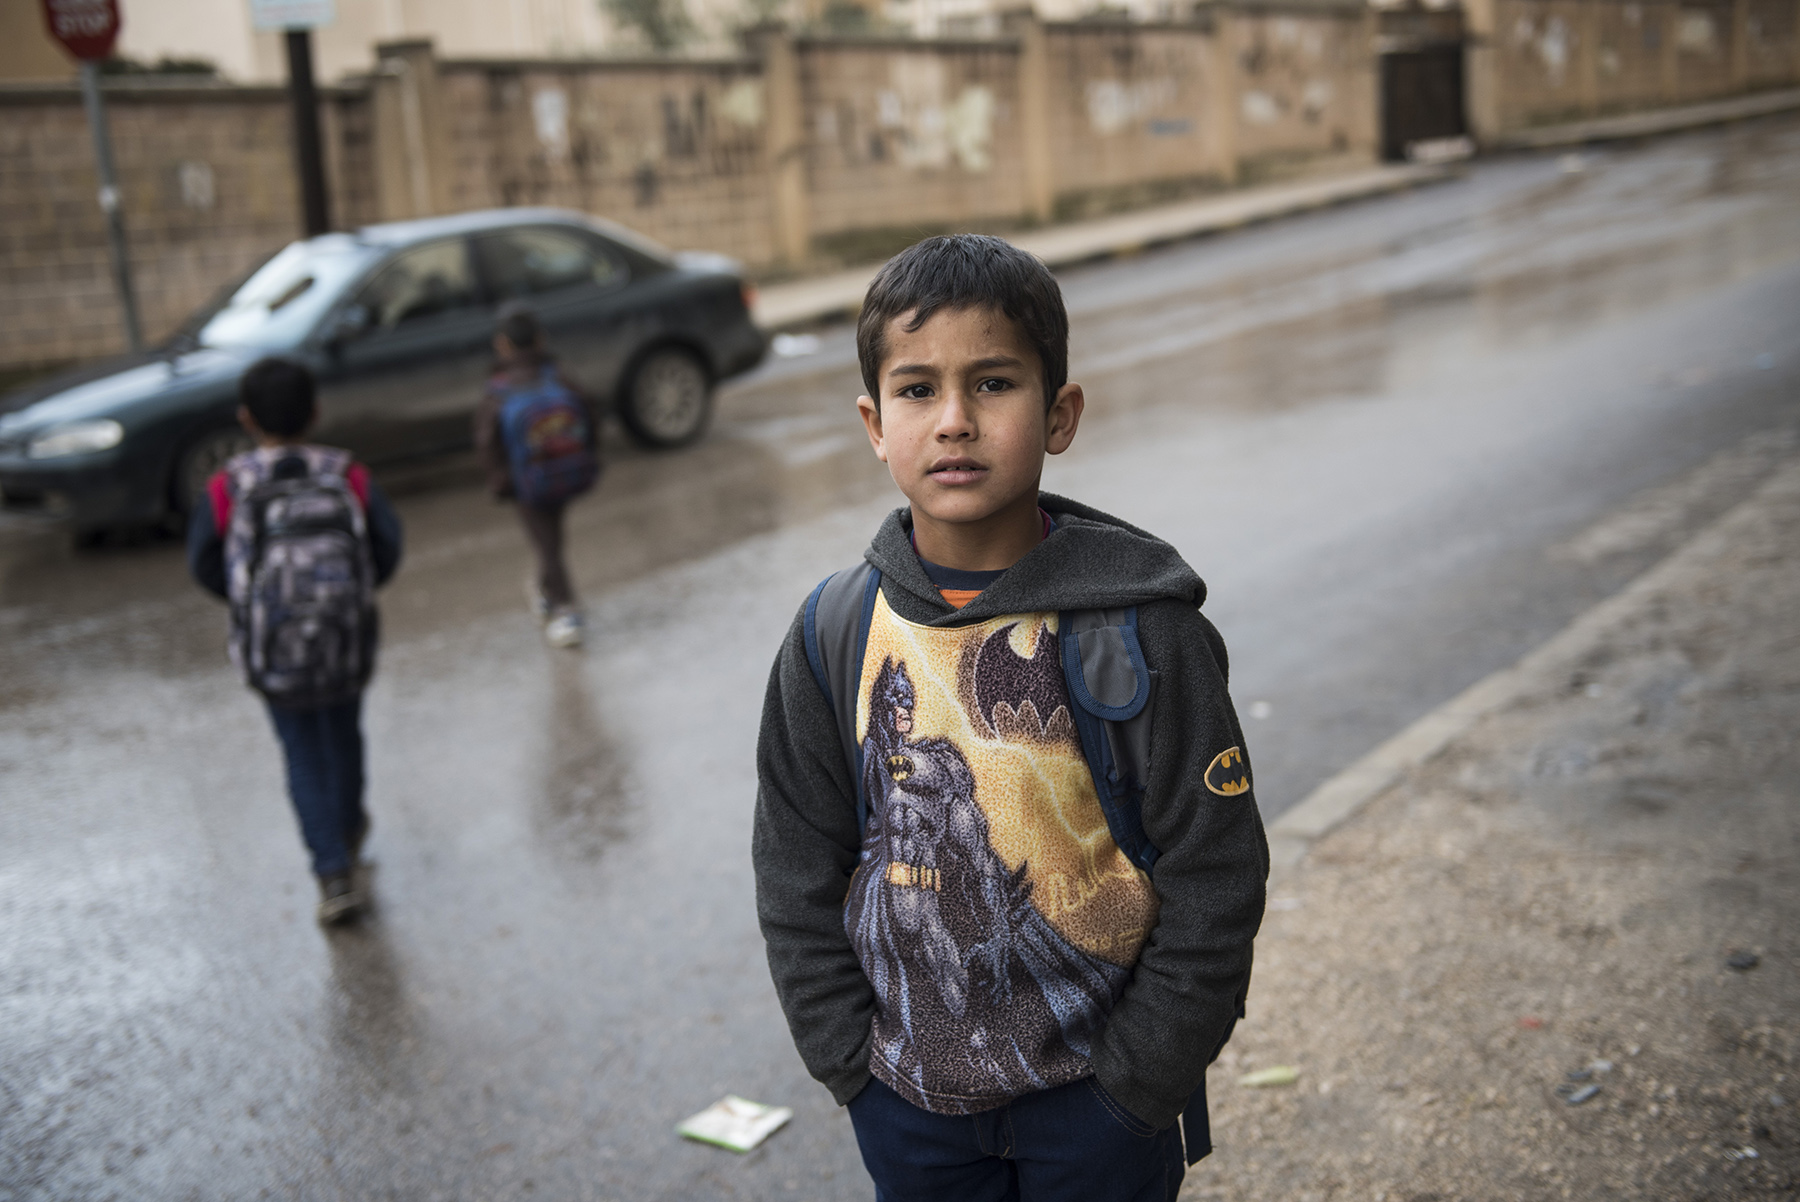 PHOTO:  Zaher is eight years old and lives with his family in Irbid, Jordan. His family left Syria after the war broke out and they have received emergency cash assistance from CARE to help them with purchasing food.